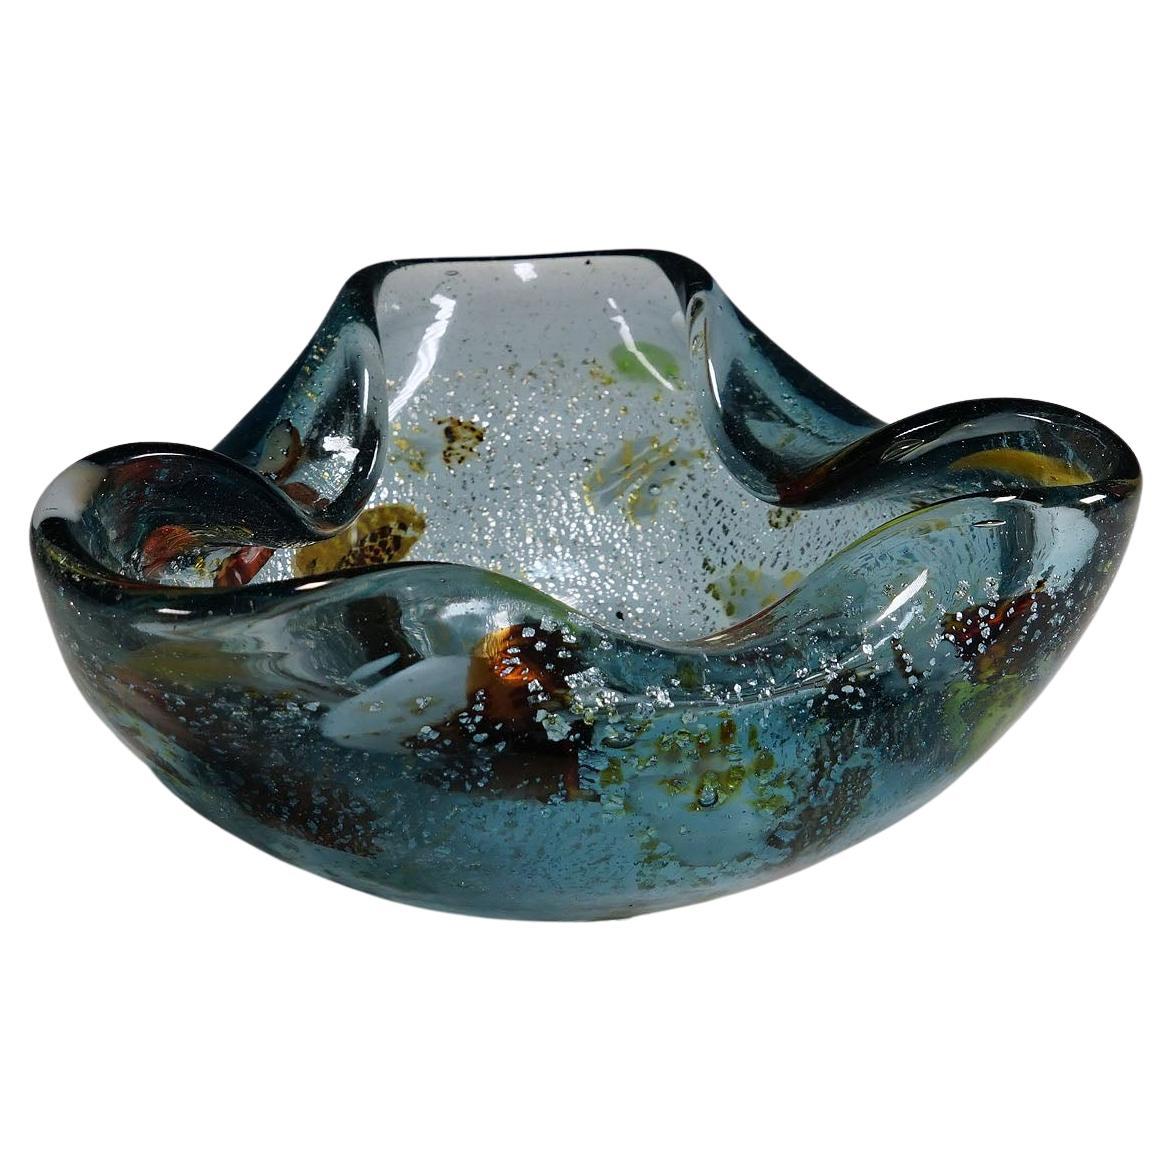 Aureliano Toso 'Attributed' Murano Art Glass Bowl, 1950s For Sale